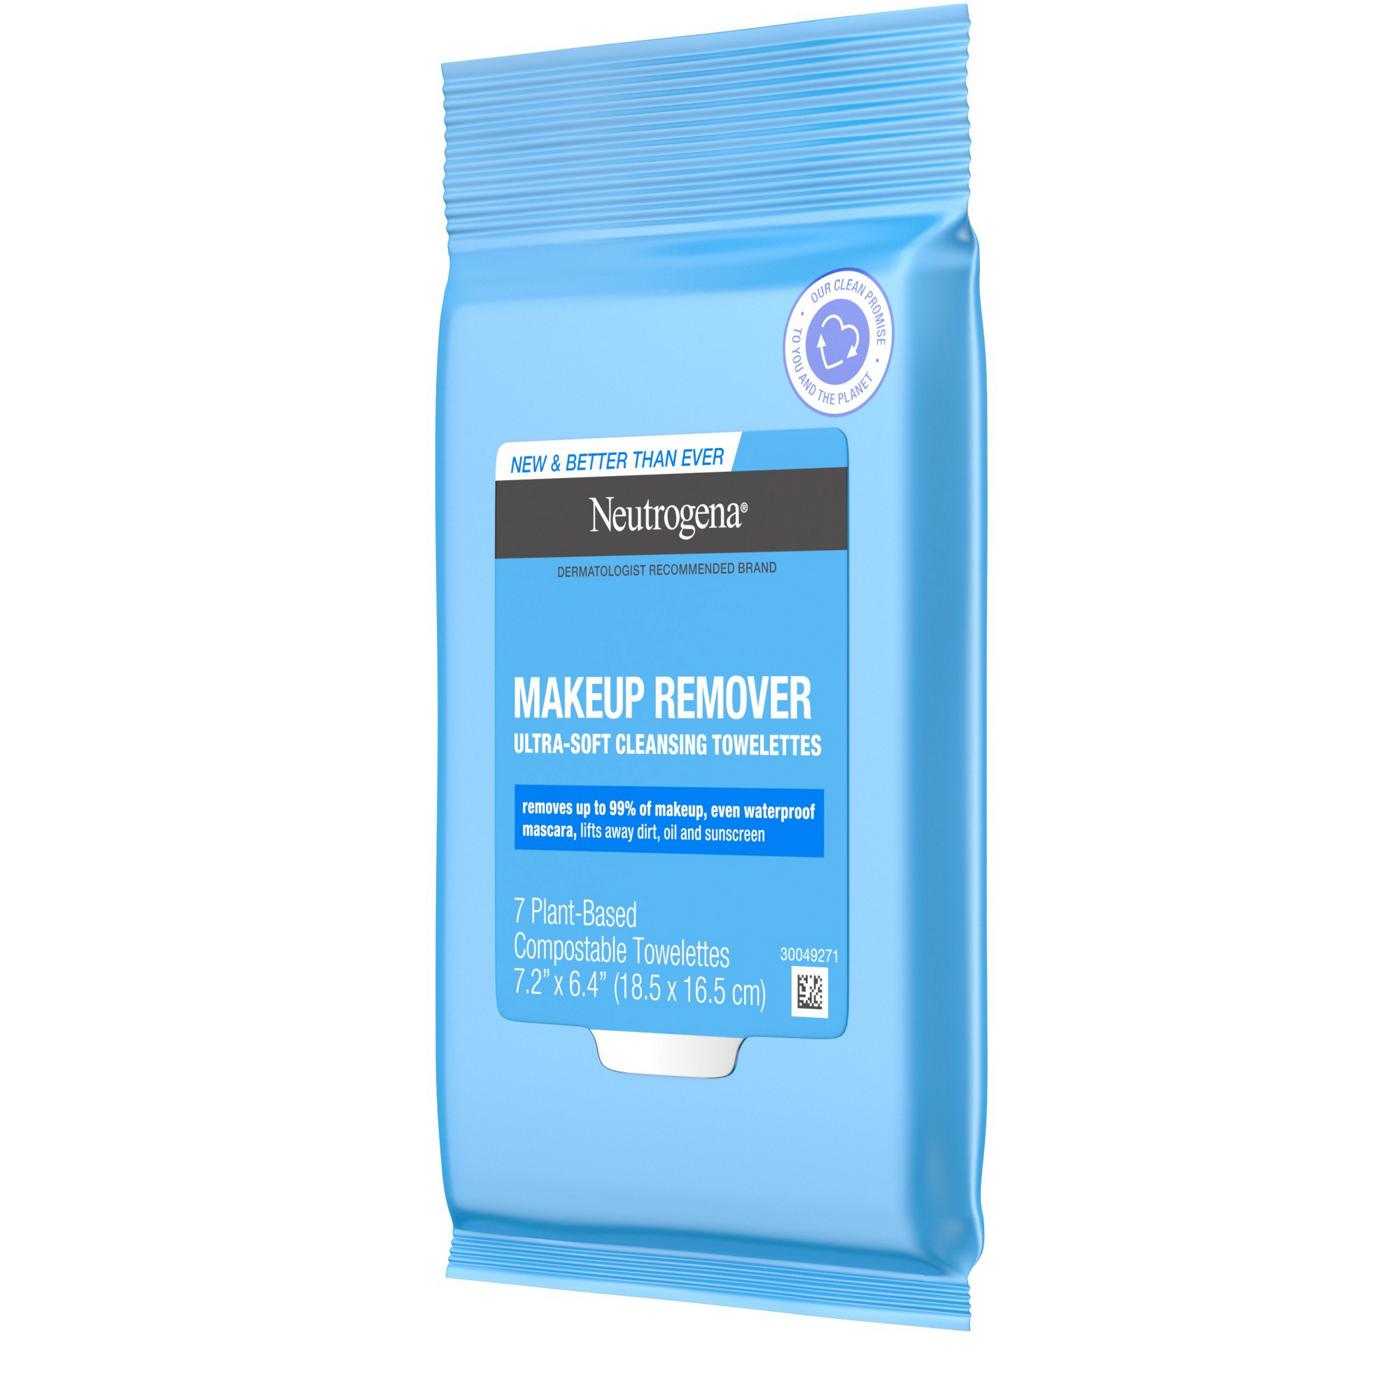 Neutrogena Makeup Remover Cleansing Towelettes; image 2 of 3